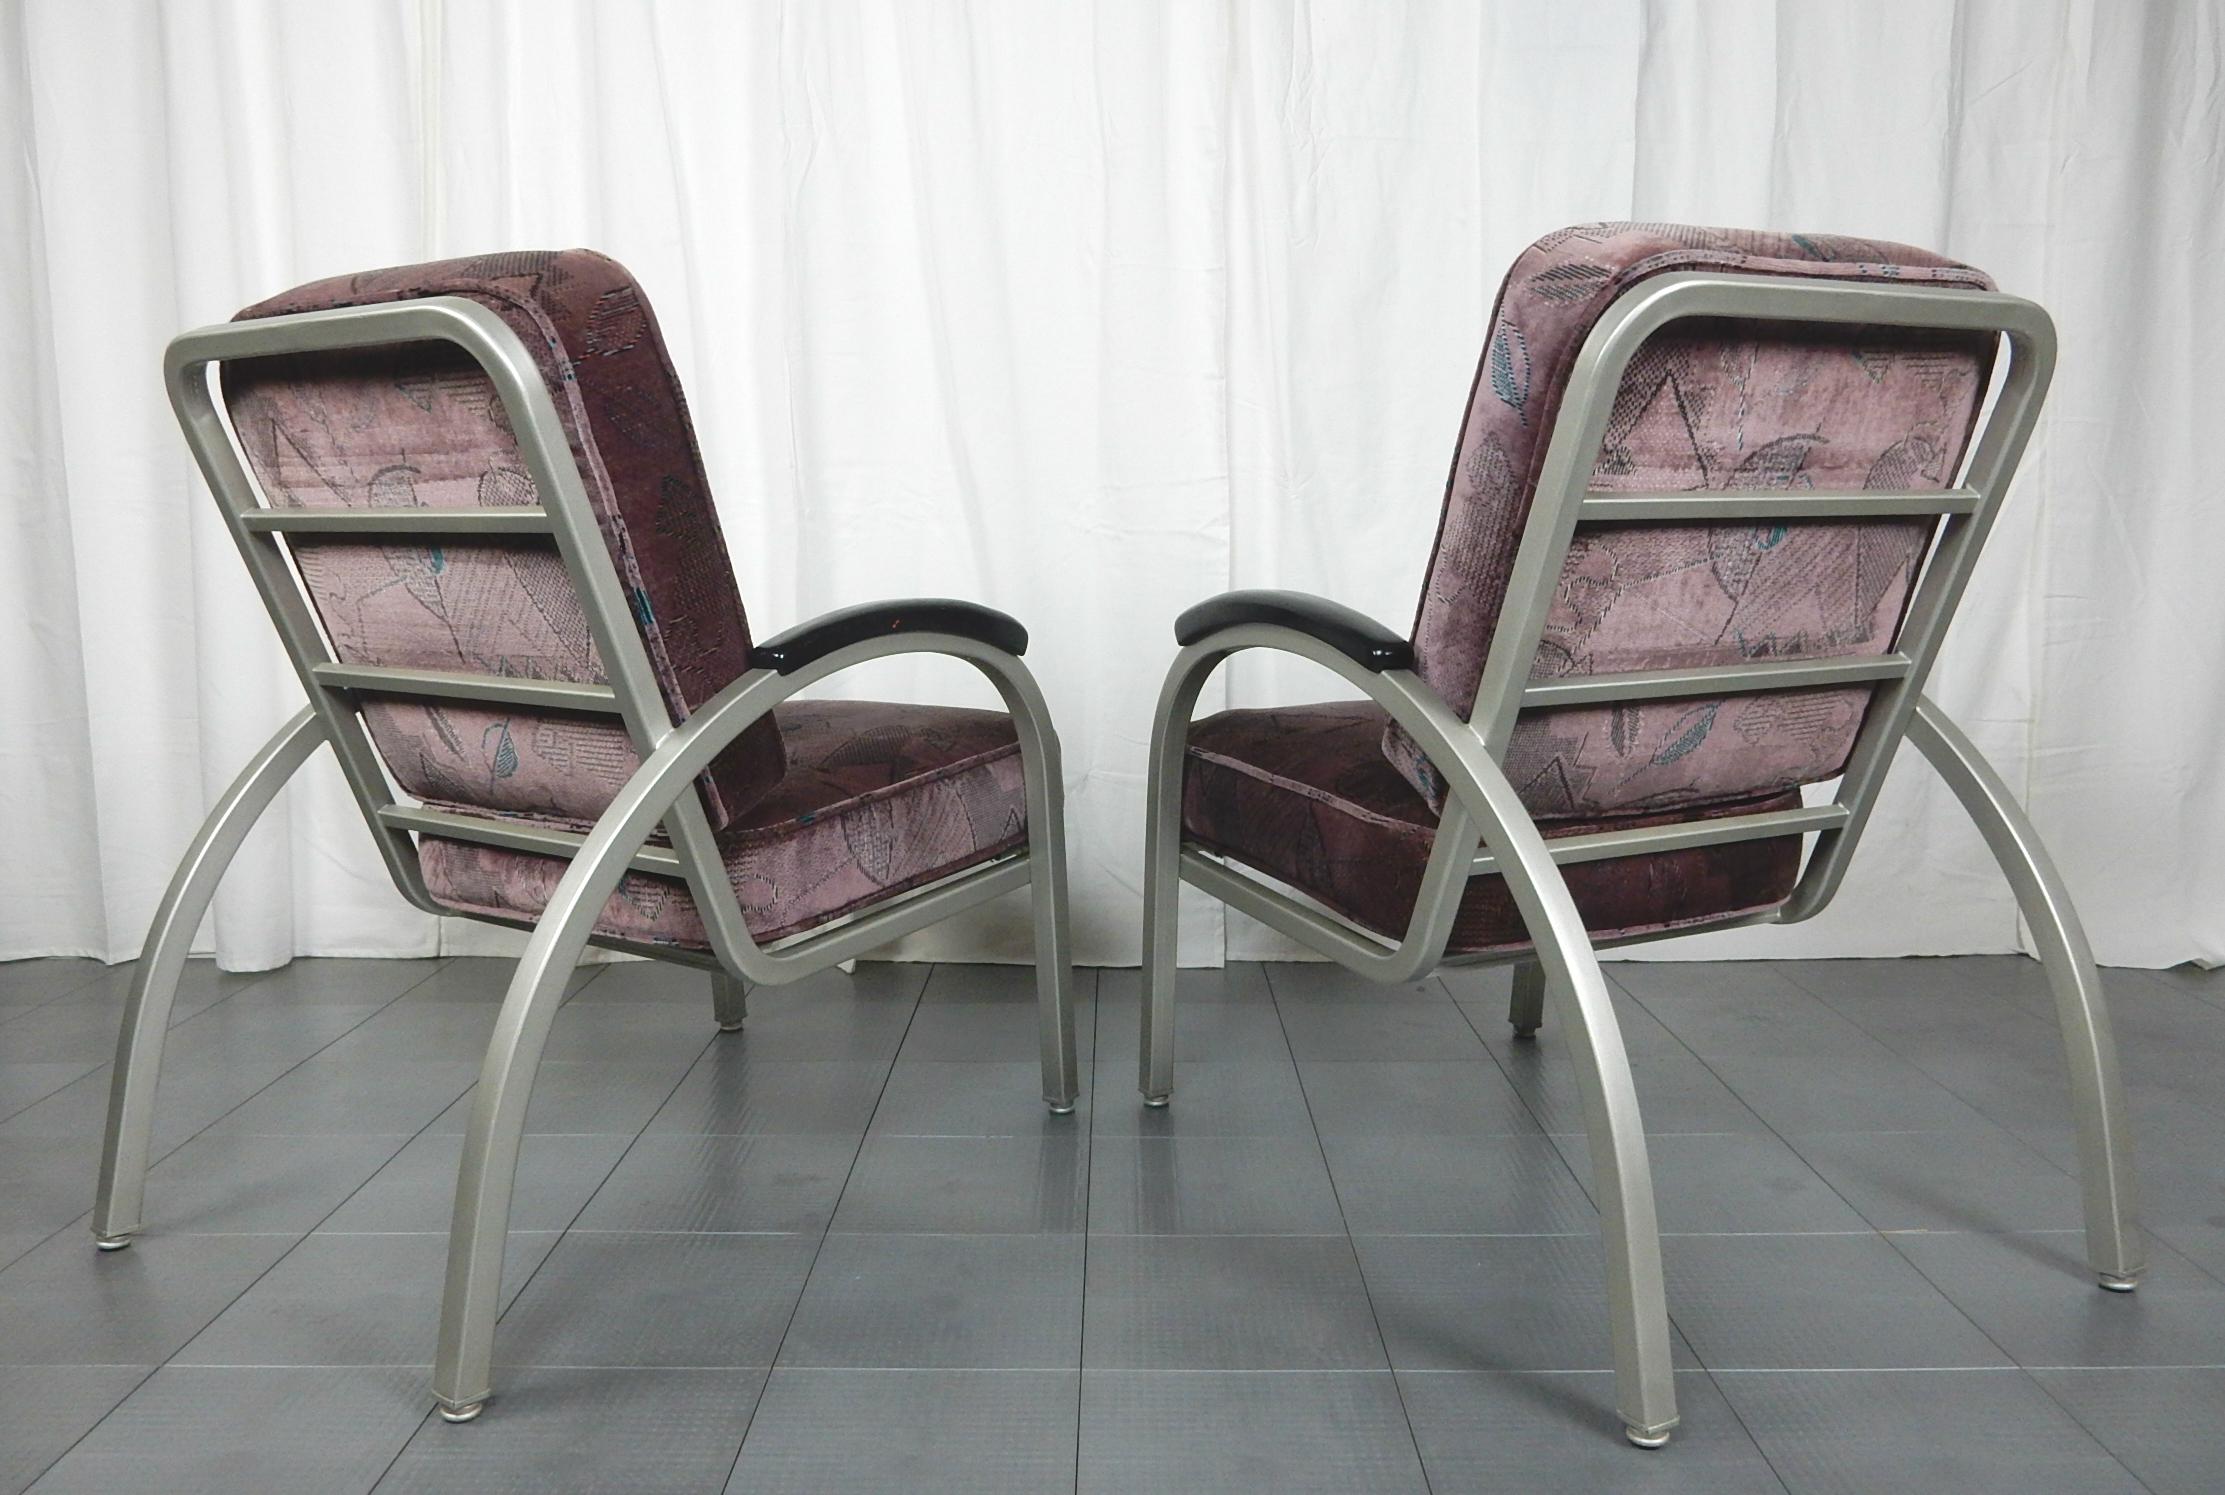 Pair of Streamline Moderne lounge chairs designed by Norman Bel Geddes
Frames are satin nickel painted with period velvet upholstered cushions with moderne design.
Both chairs are clean and in very good solid condition. Exceptionally